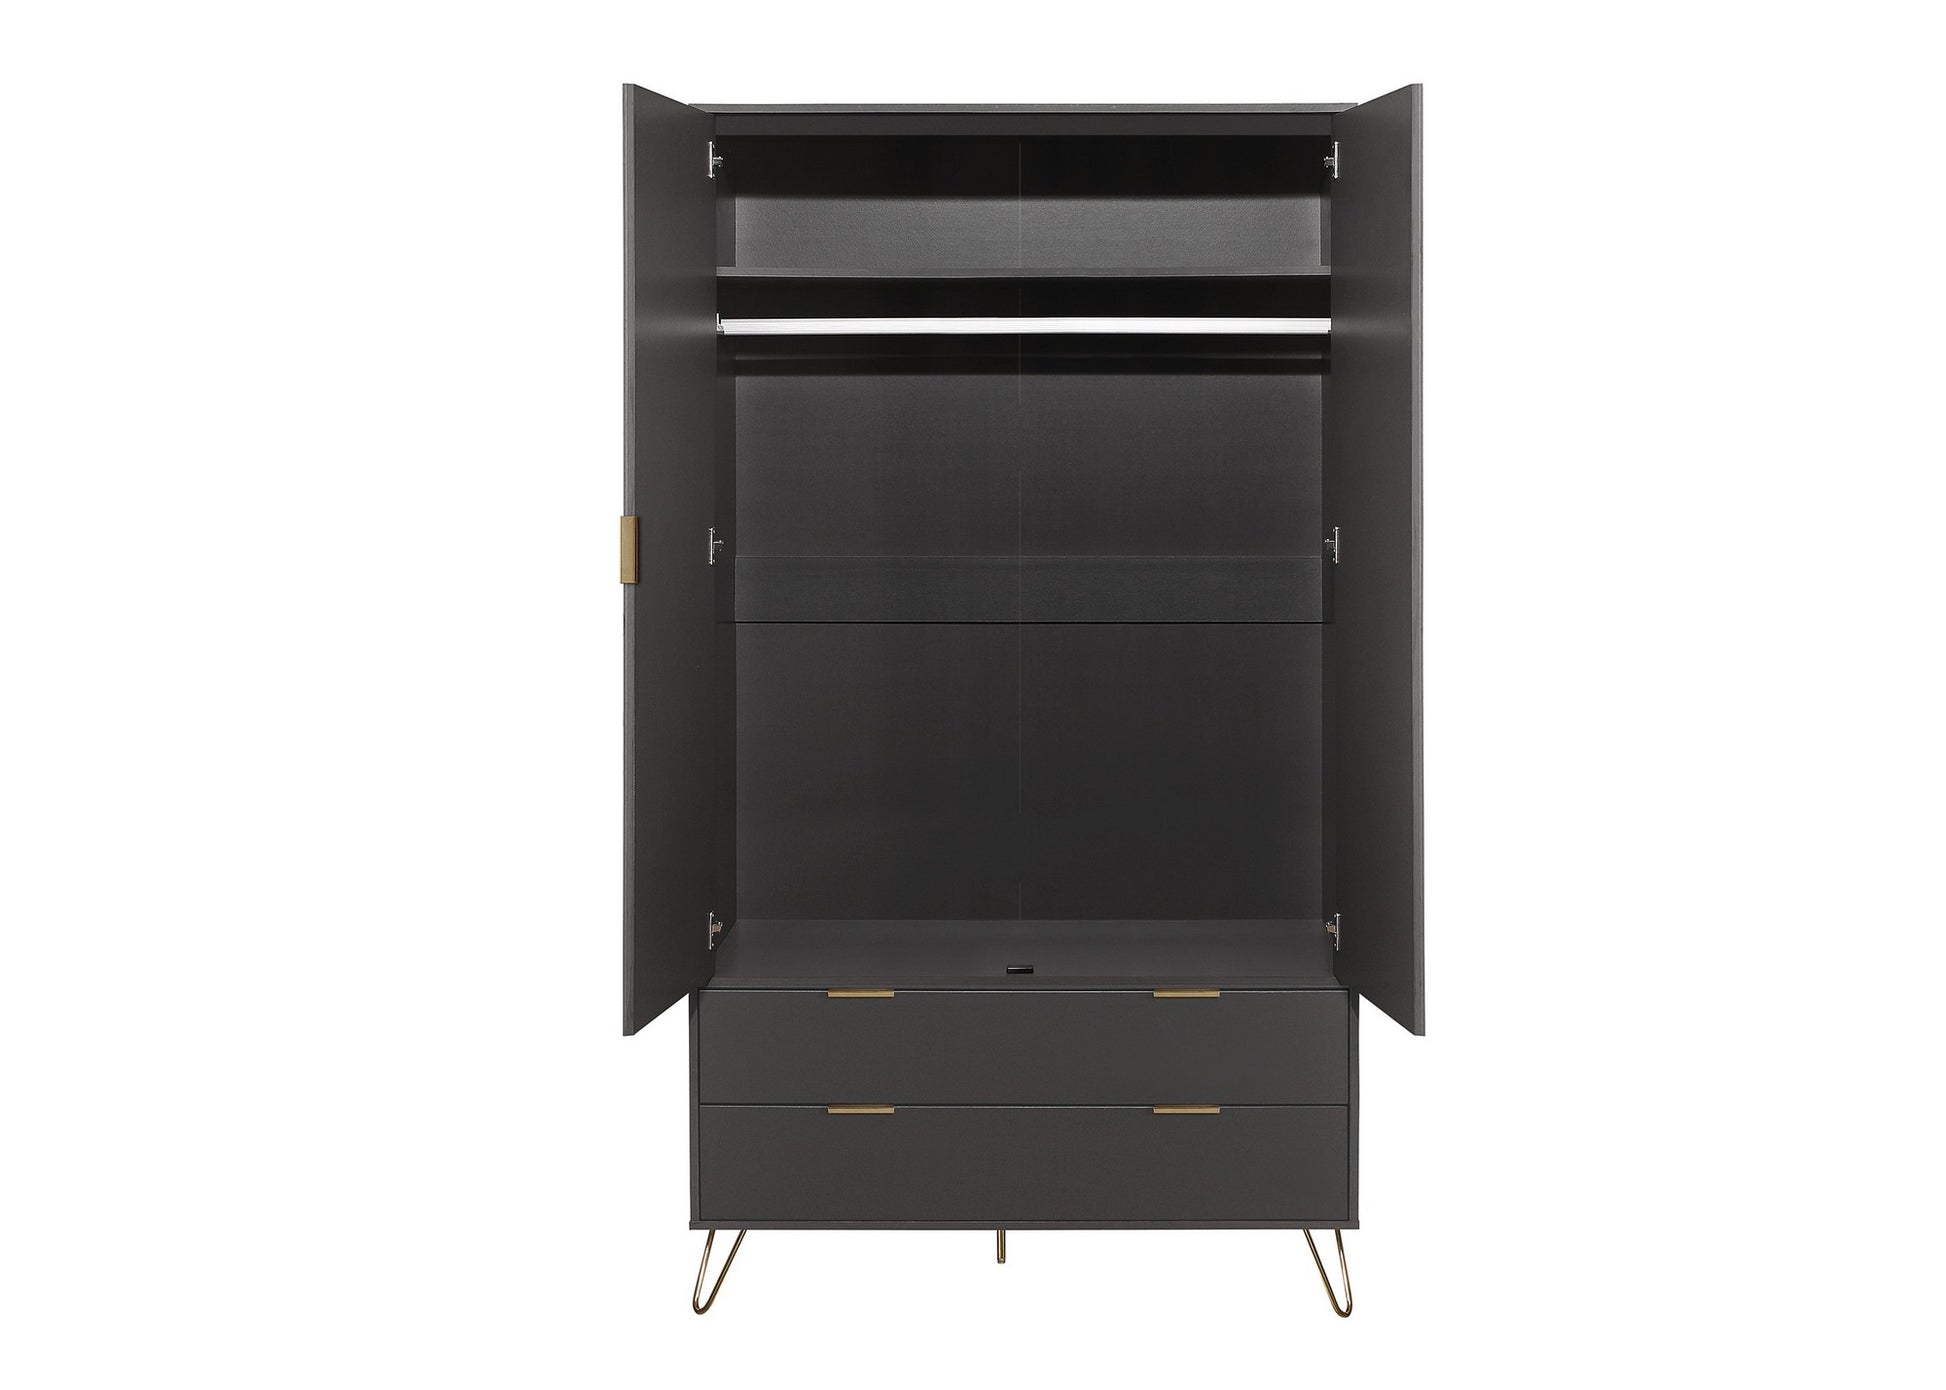 Arlo 2-Door Wardrobe with 2 Drawers, Gold Accent Handles, Hairpin Legs, Internal Shelves, Particle Board Construction